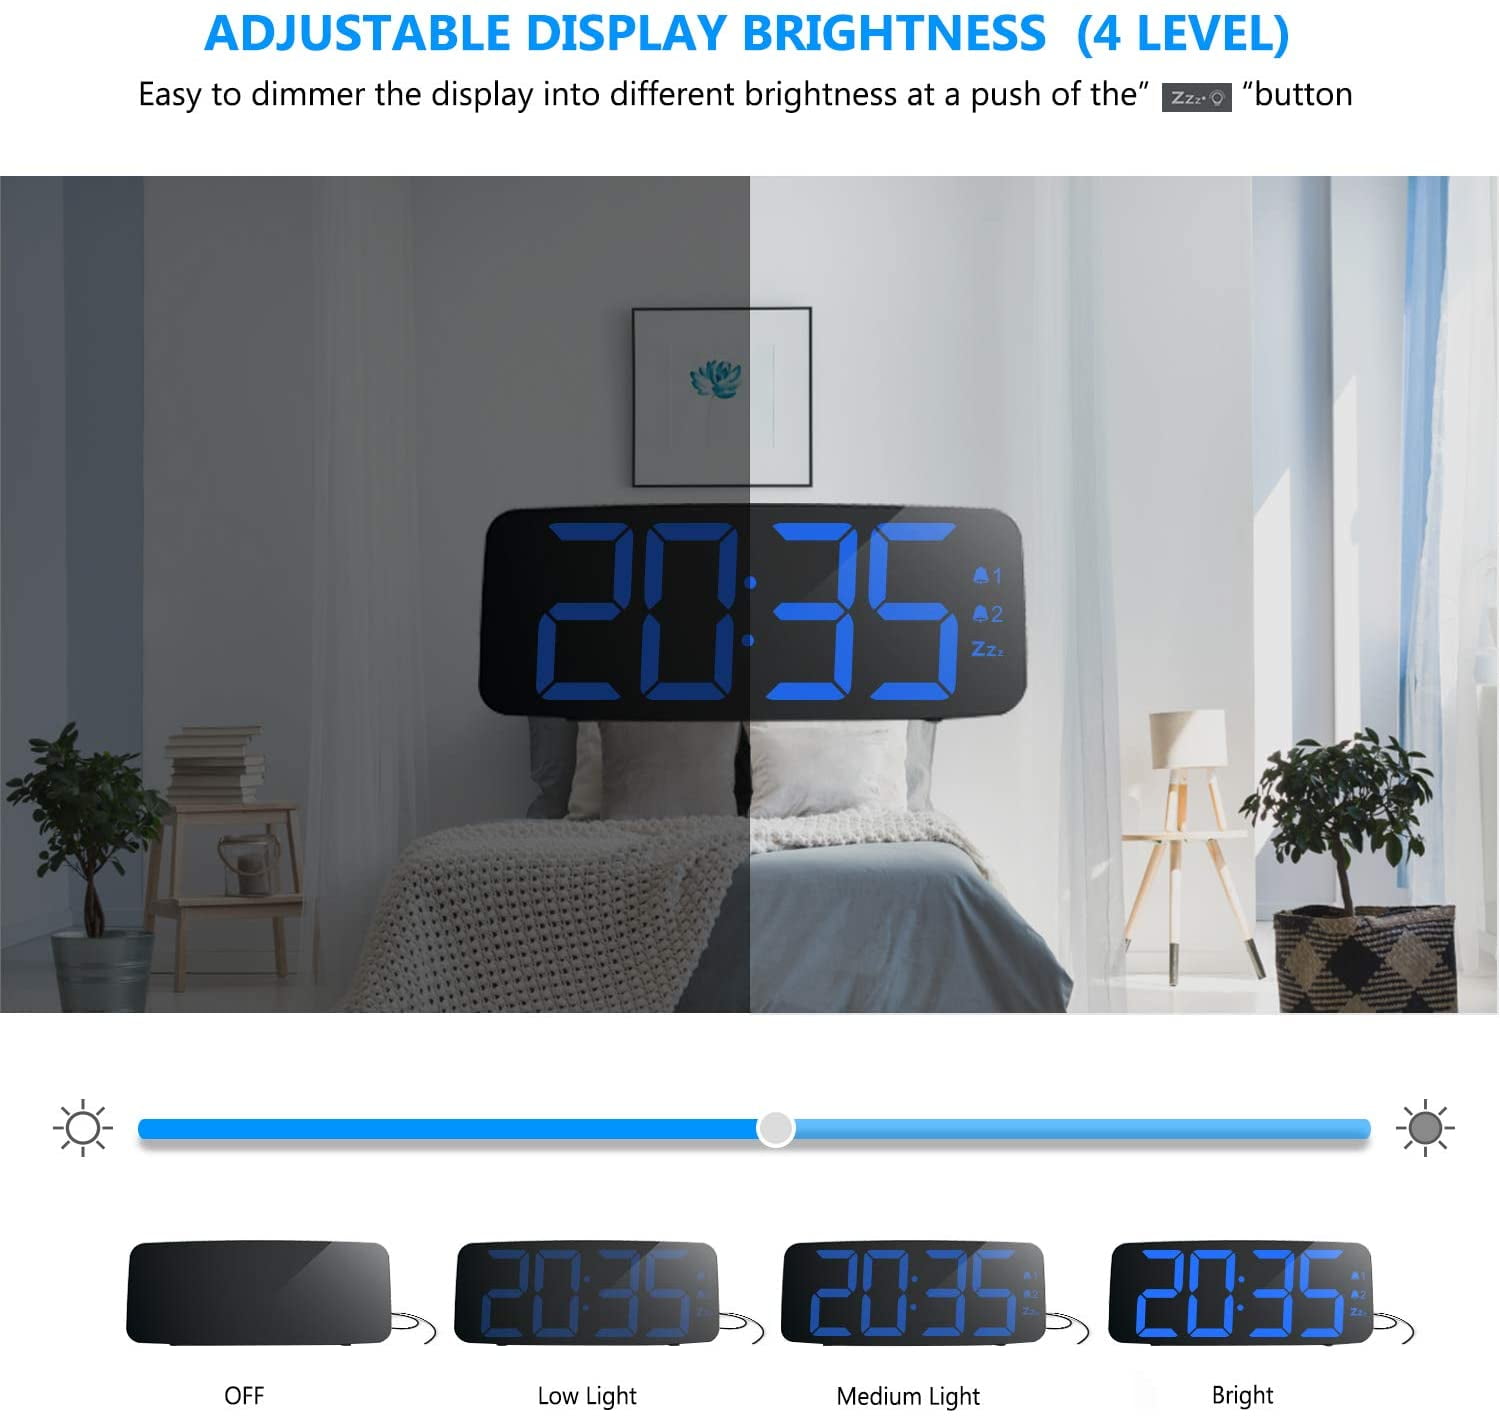 HAPTIME Digital Alarm Clock with FM Radio Dual-Alarm Snooze Large LED Display 12hr 24hr Format and Brightness Adjustable for Bedroom Black Powered by USB Port and Backup Battery for Clock-Setting 